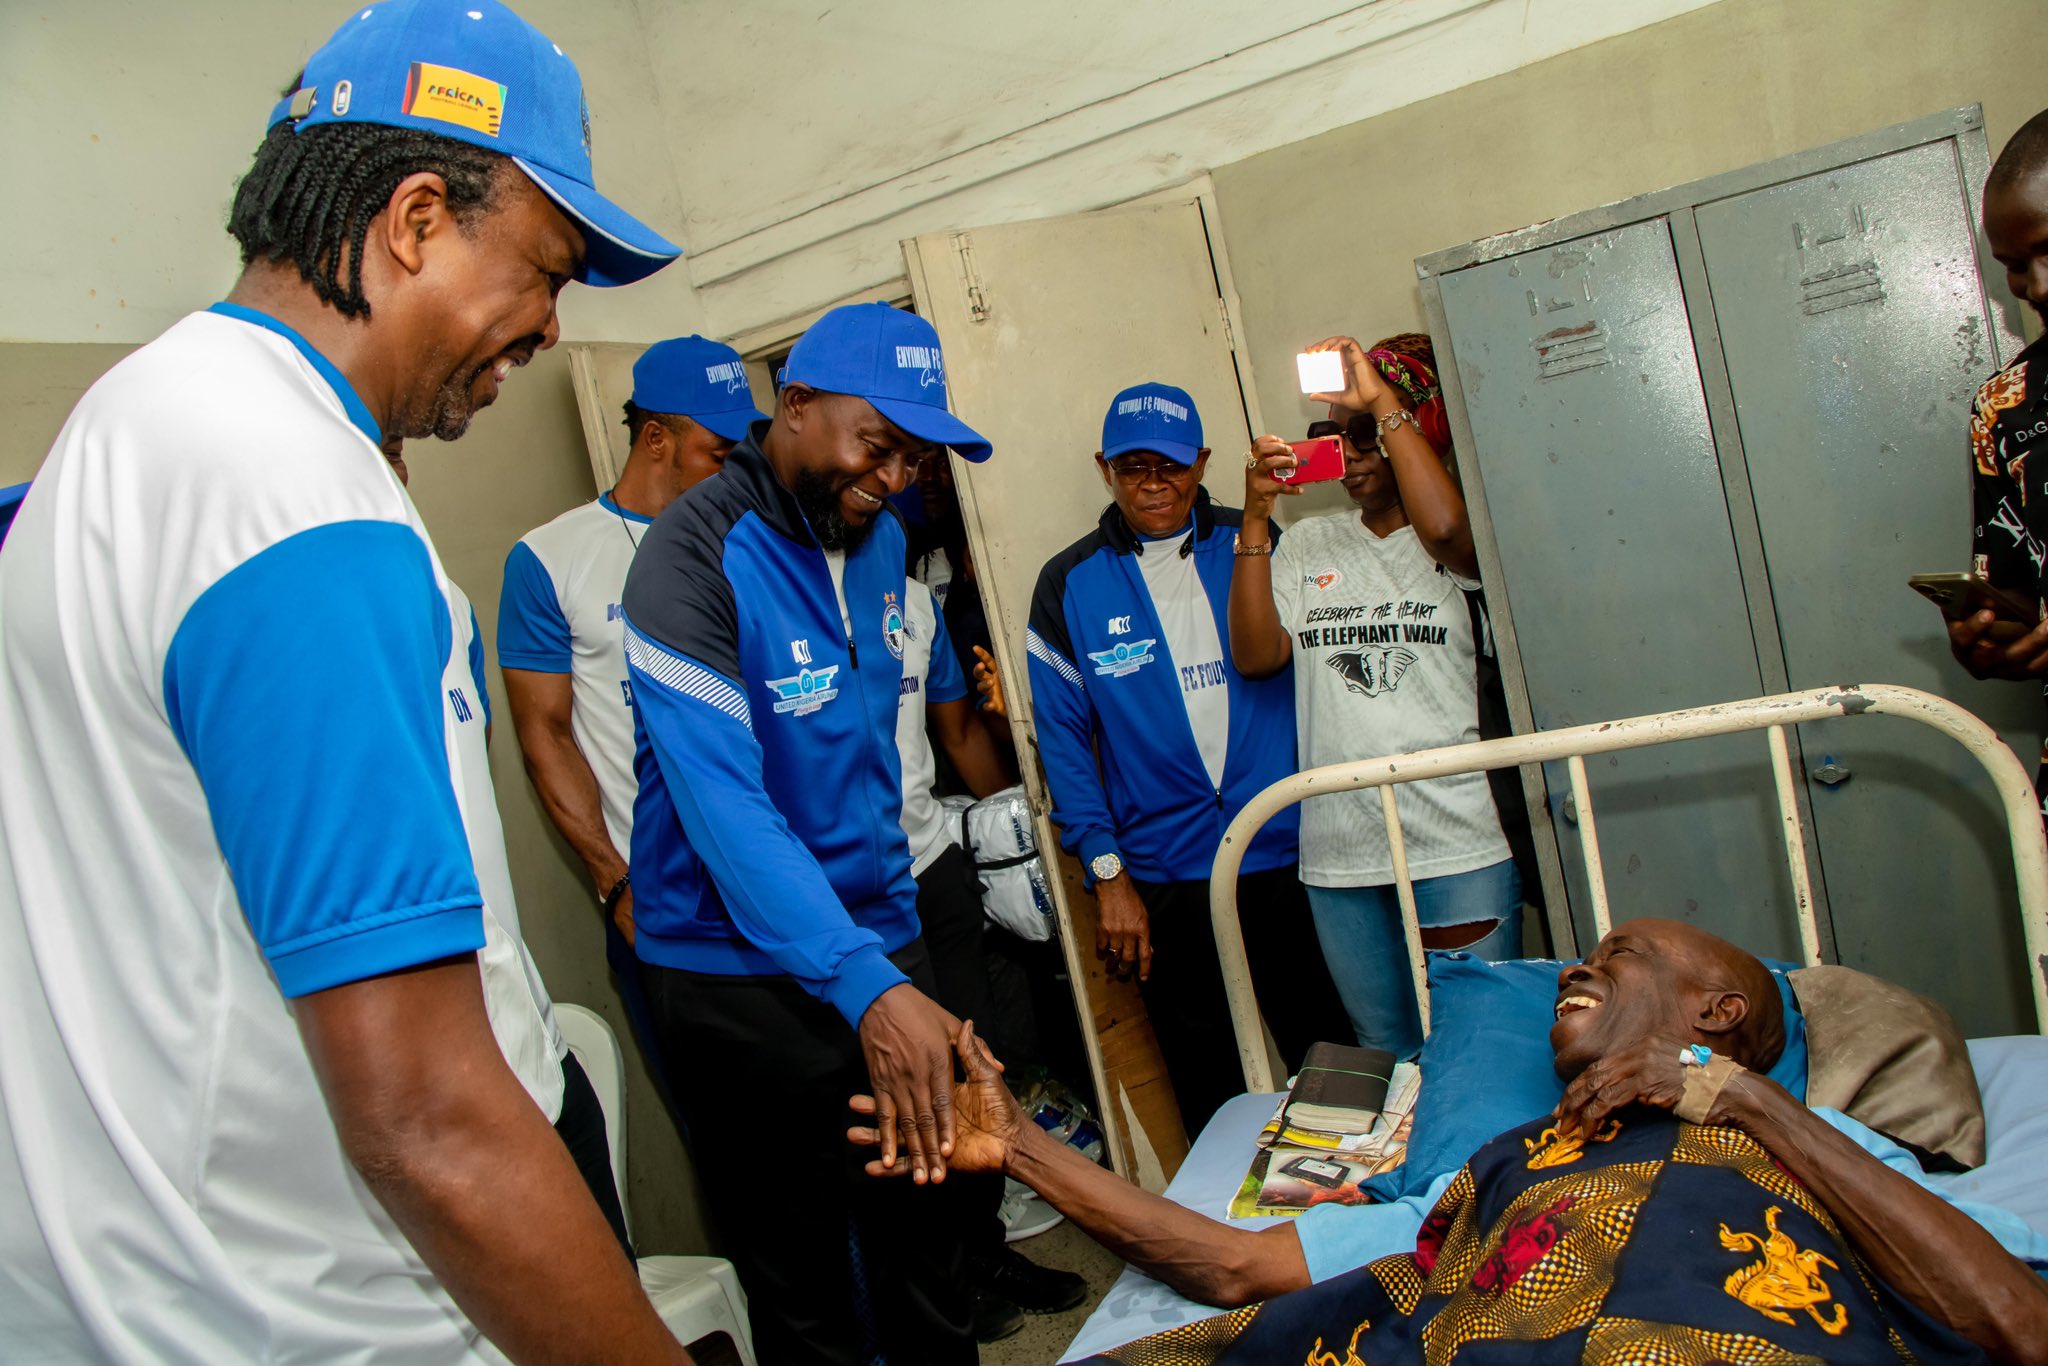 Enyimba, Kanu Heart Foundation put smiles on hospital patients before Christmas